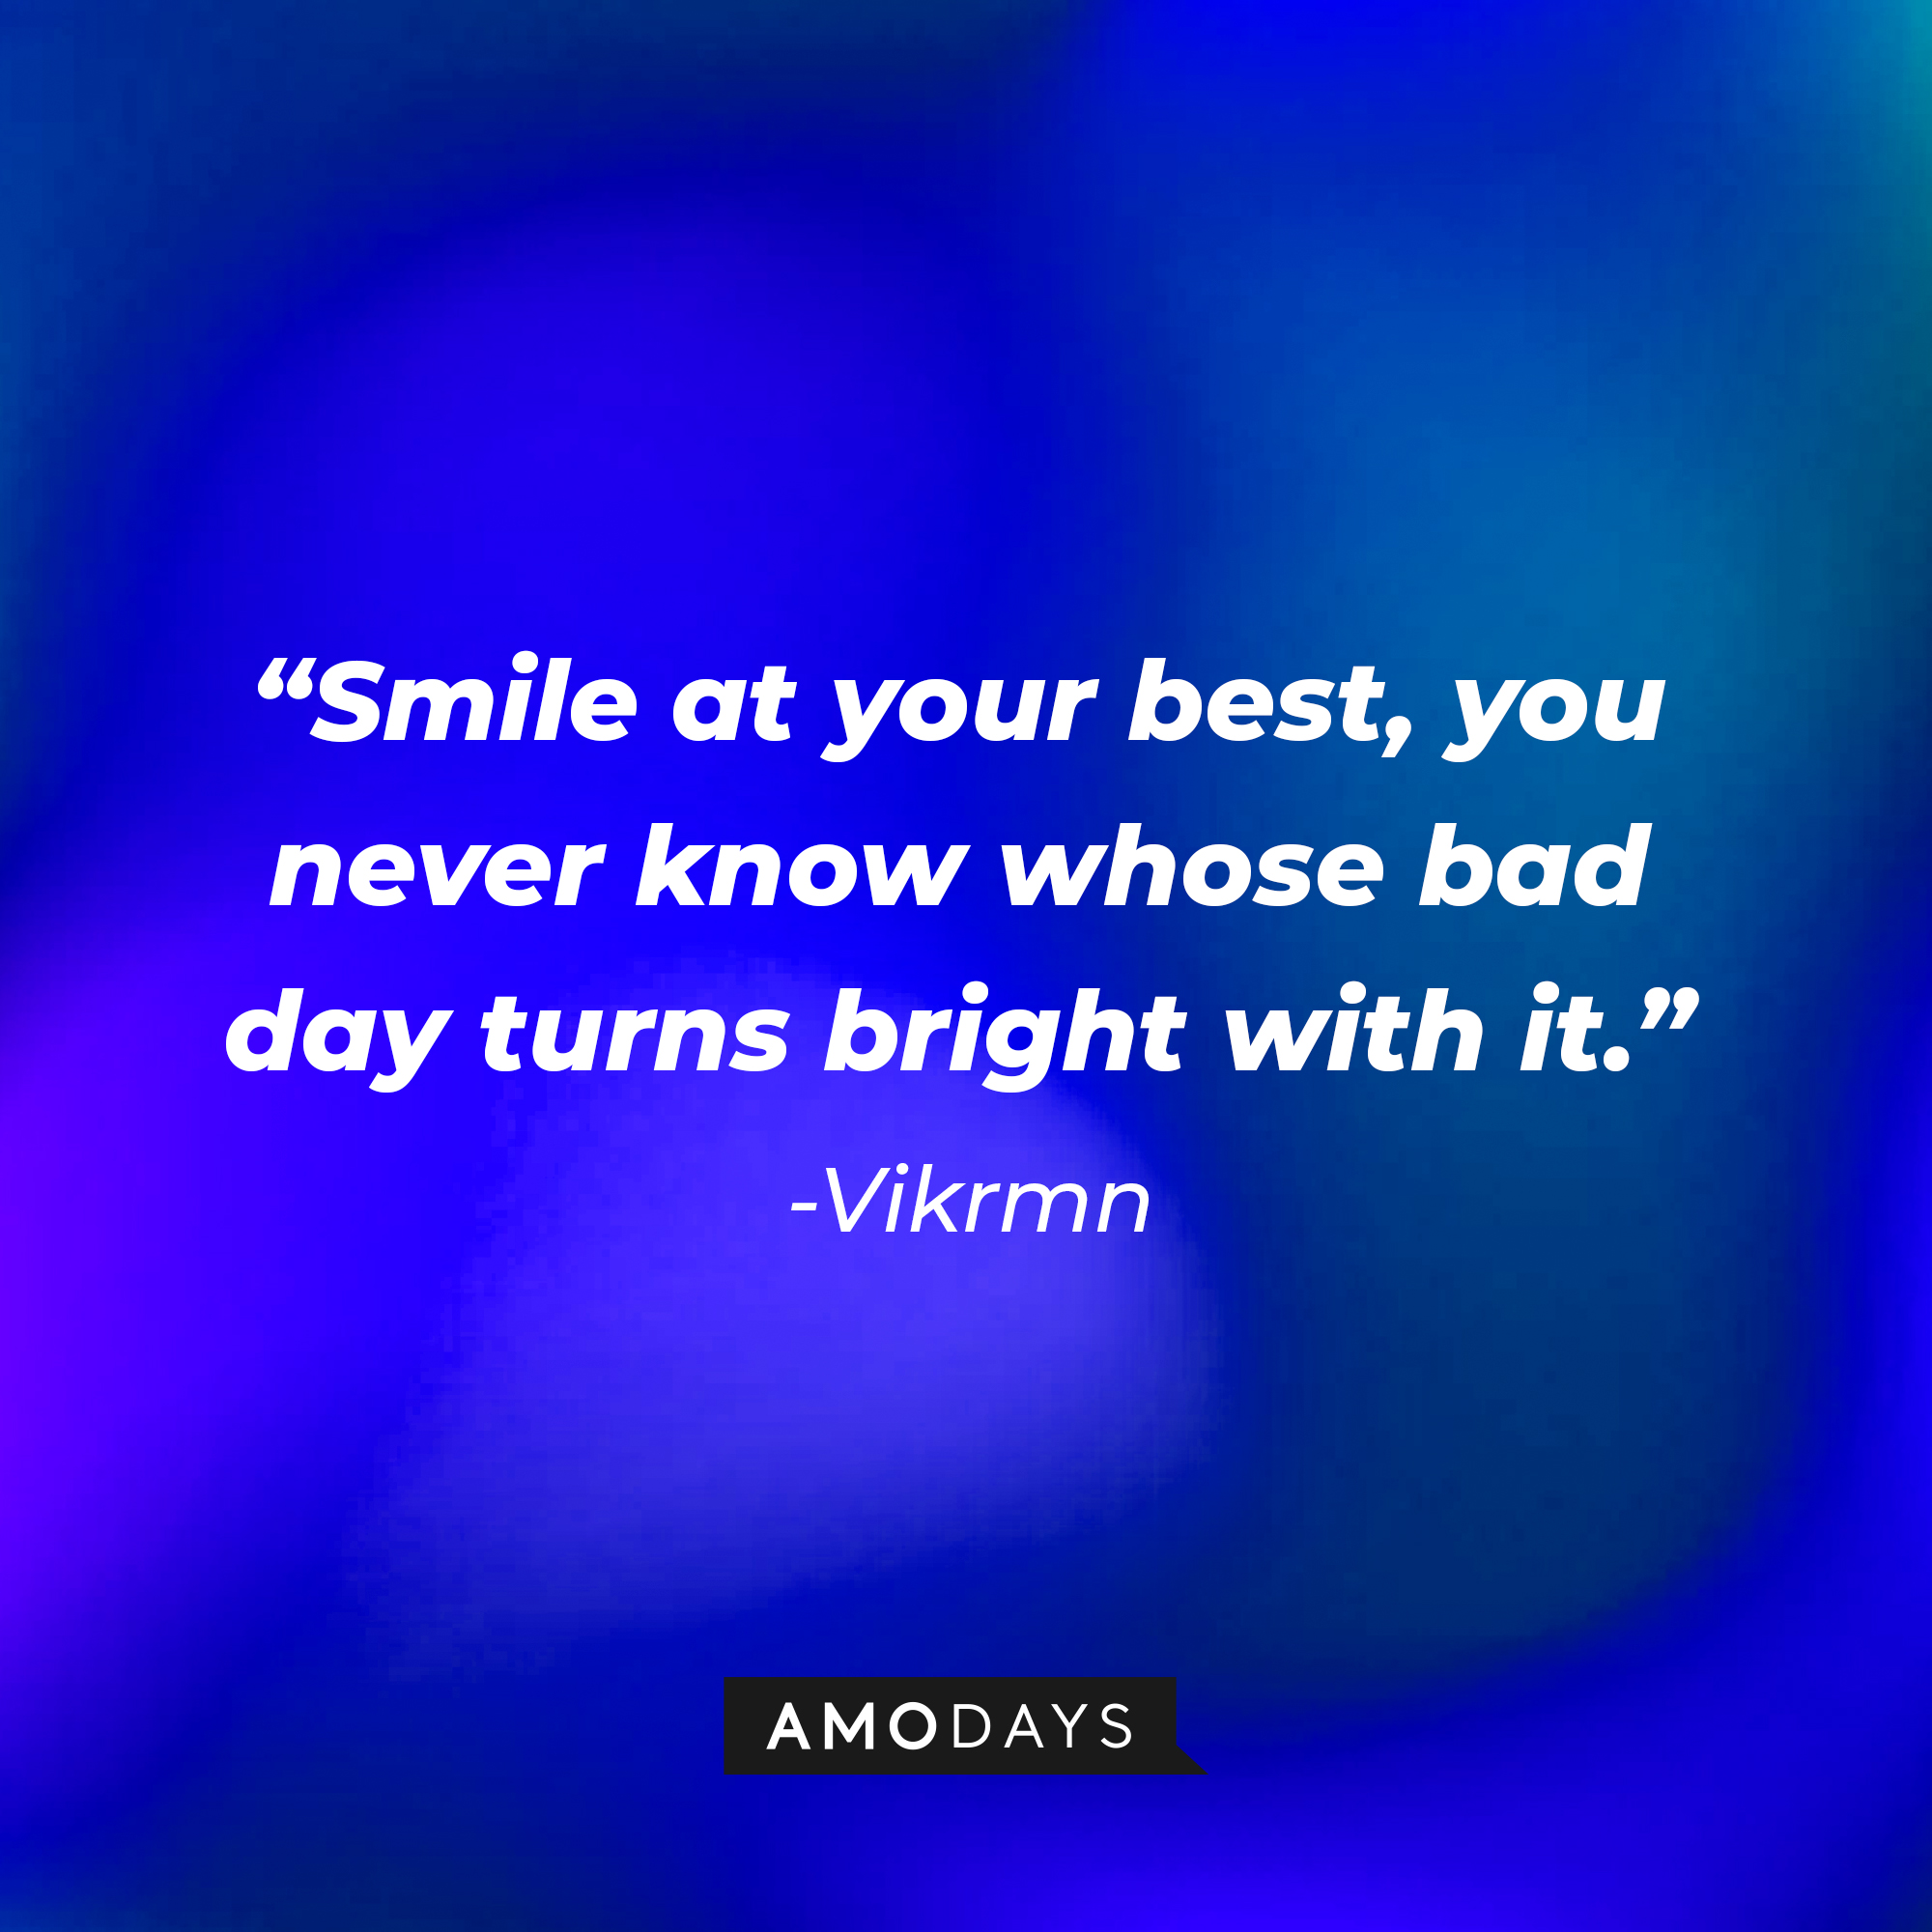 Vikrmn's quote: "Smile at your best, you never know whose bad day turns bright with it."